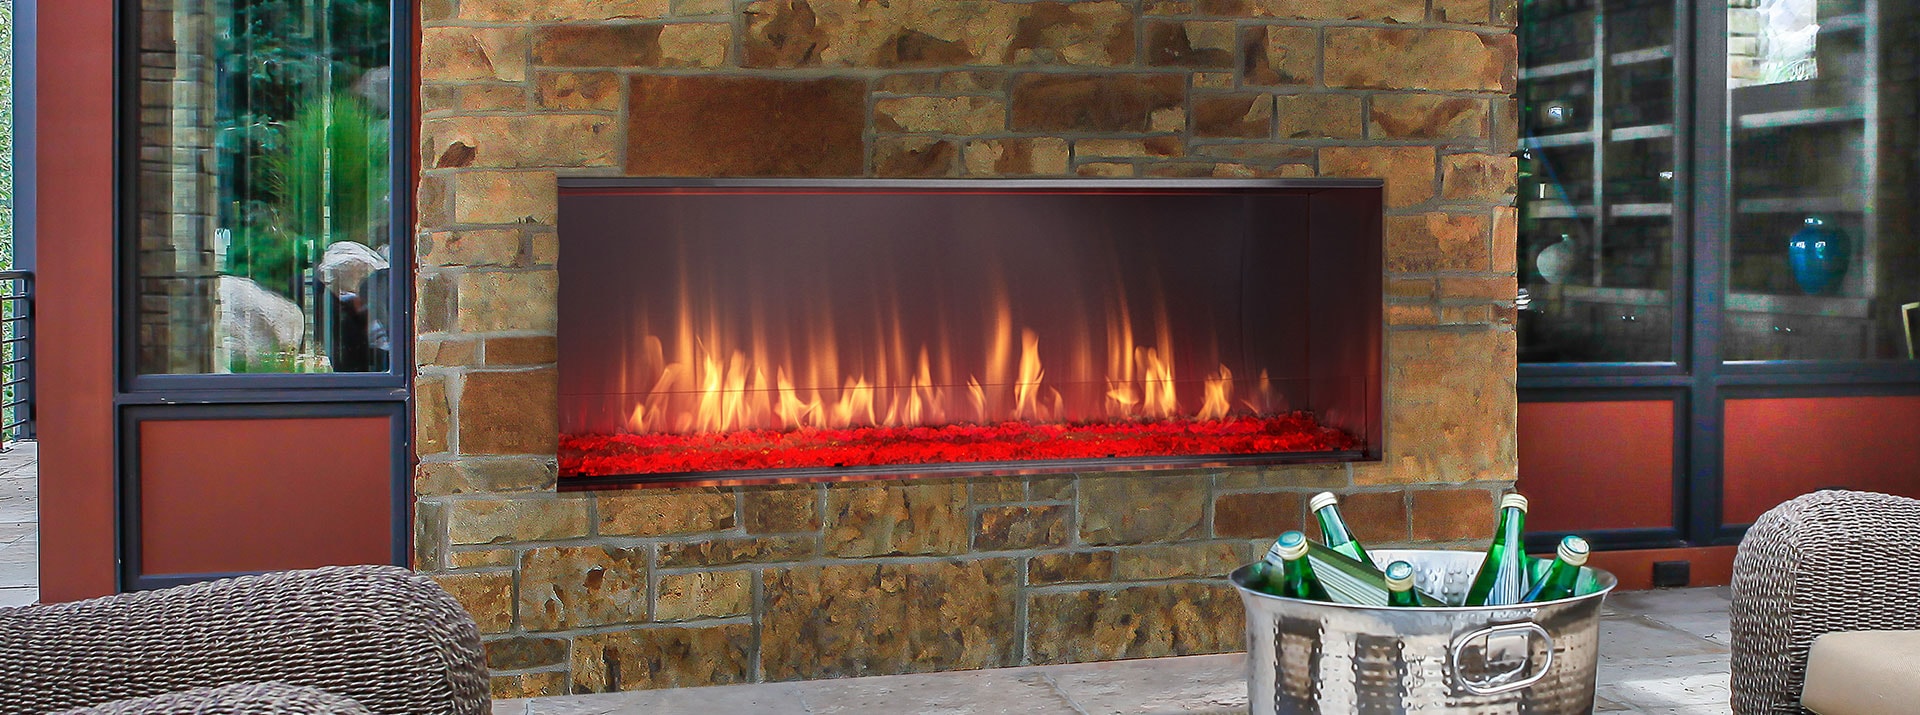 Superior Gas Fireplace Manual Awesome Lanai Gas Outdoor Fireplace